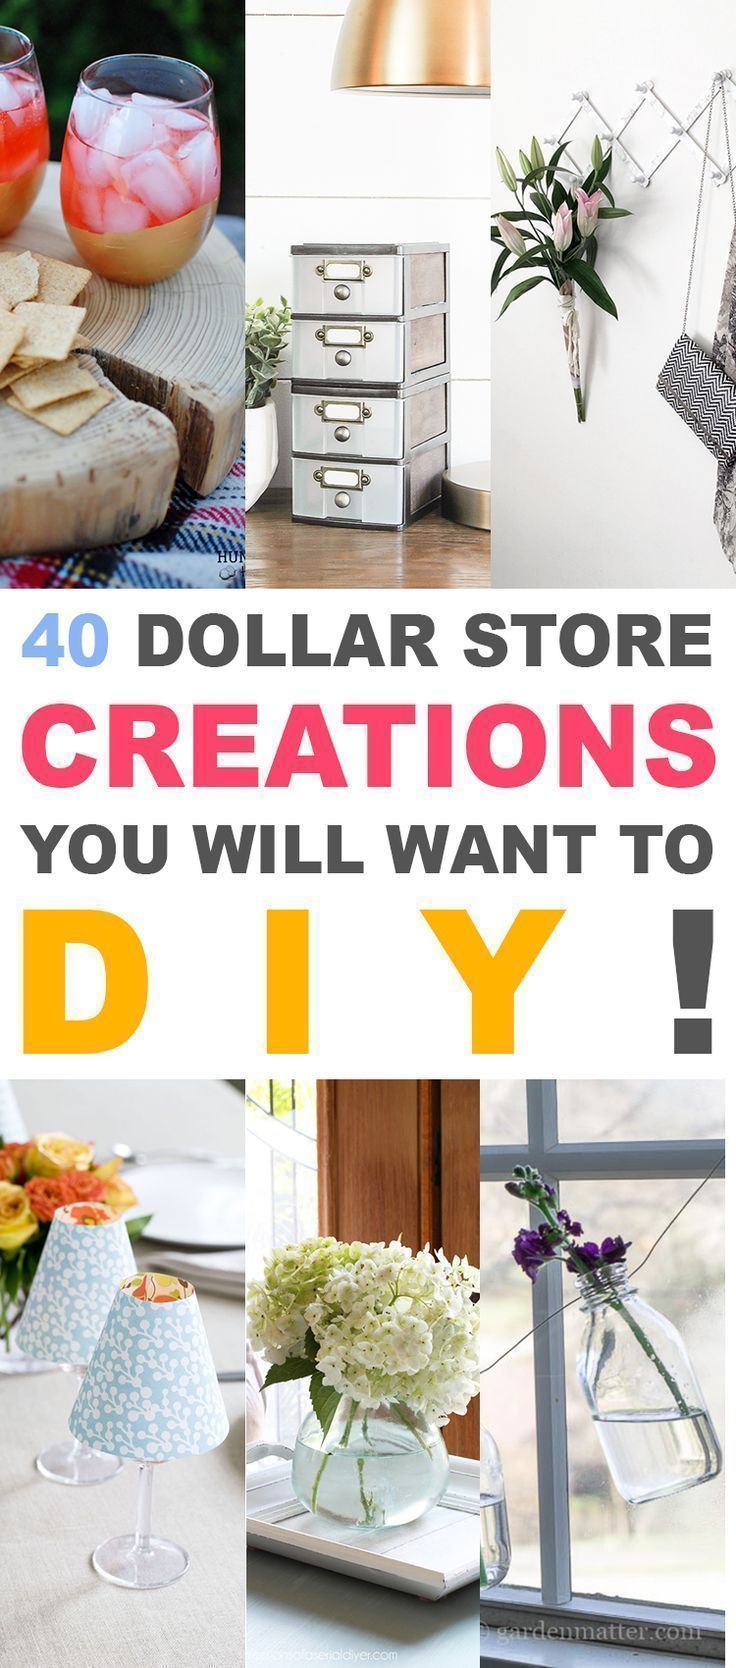 40 Dollar Store Creations You Will Want to DIY - The Cottage Market -   16 diy projects Dollar Store kids ideas